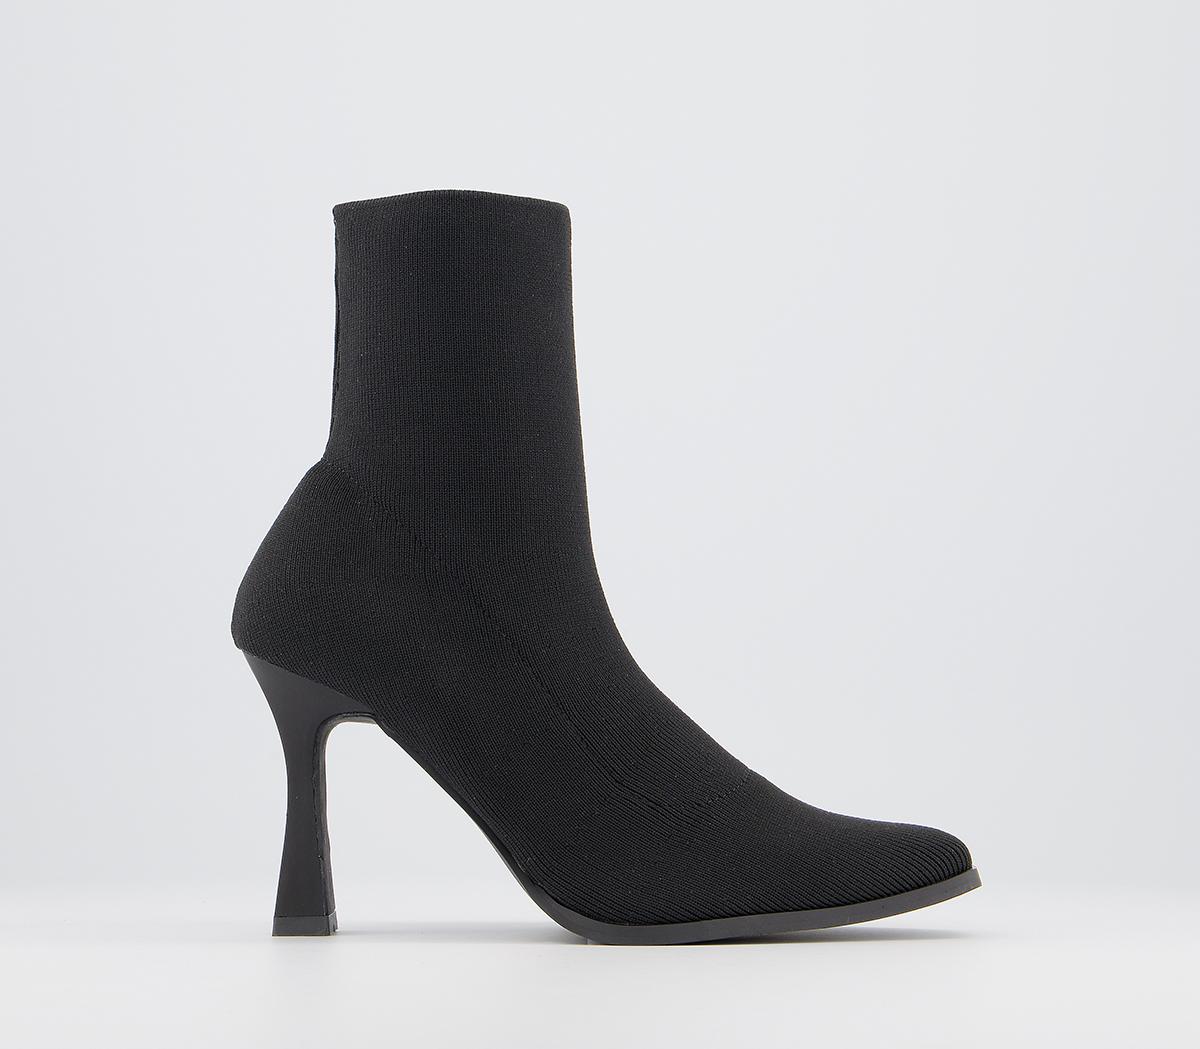 OFFICEAbstract Pointed Stretch Ankle BootsBlack Knit